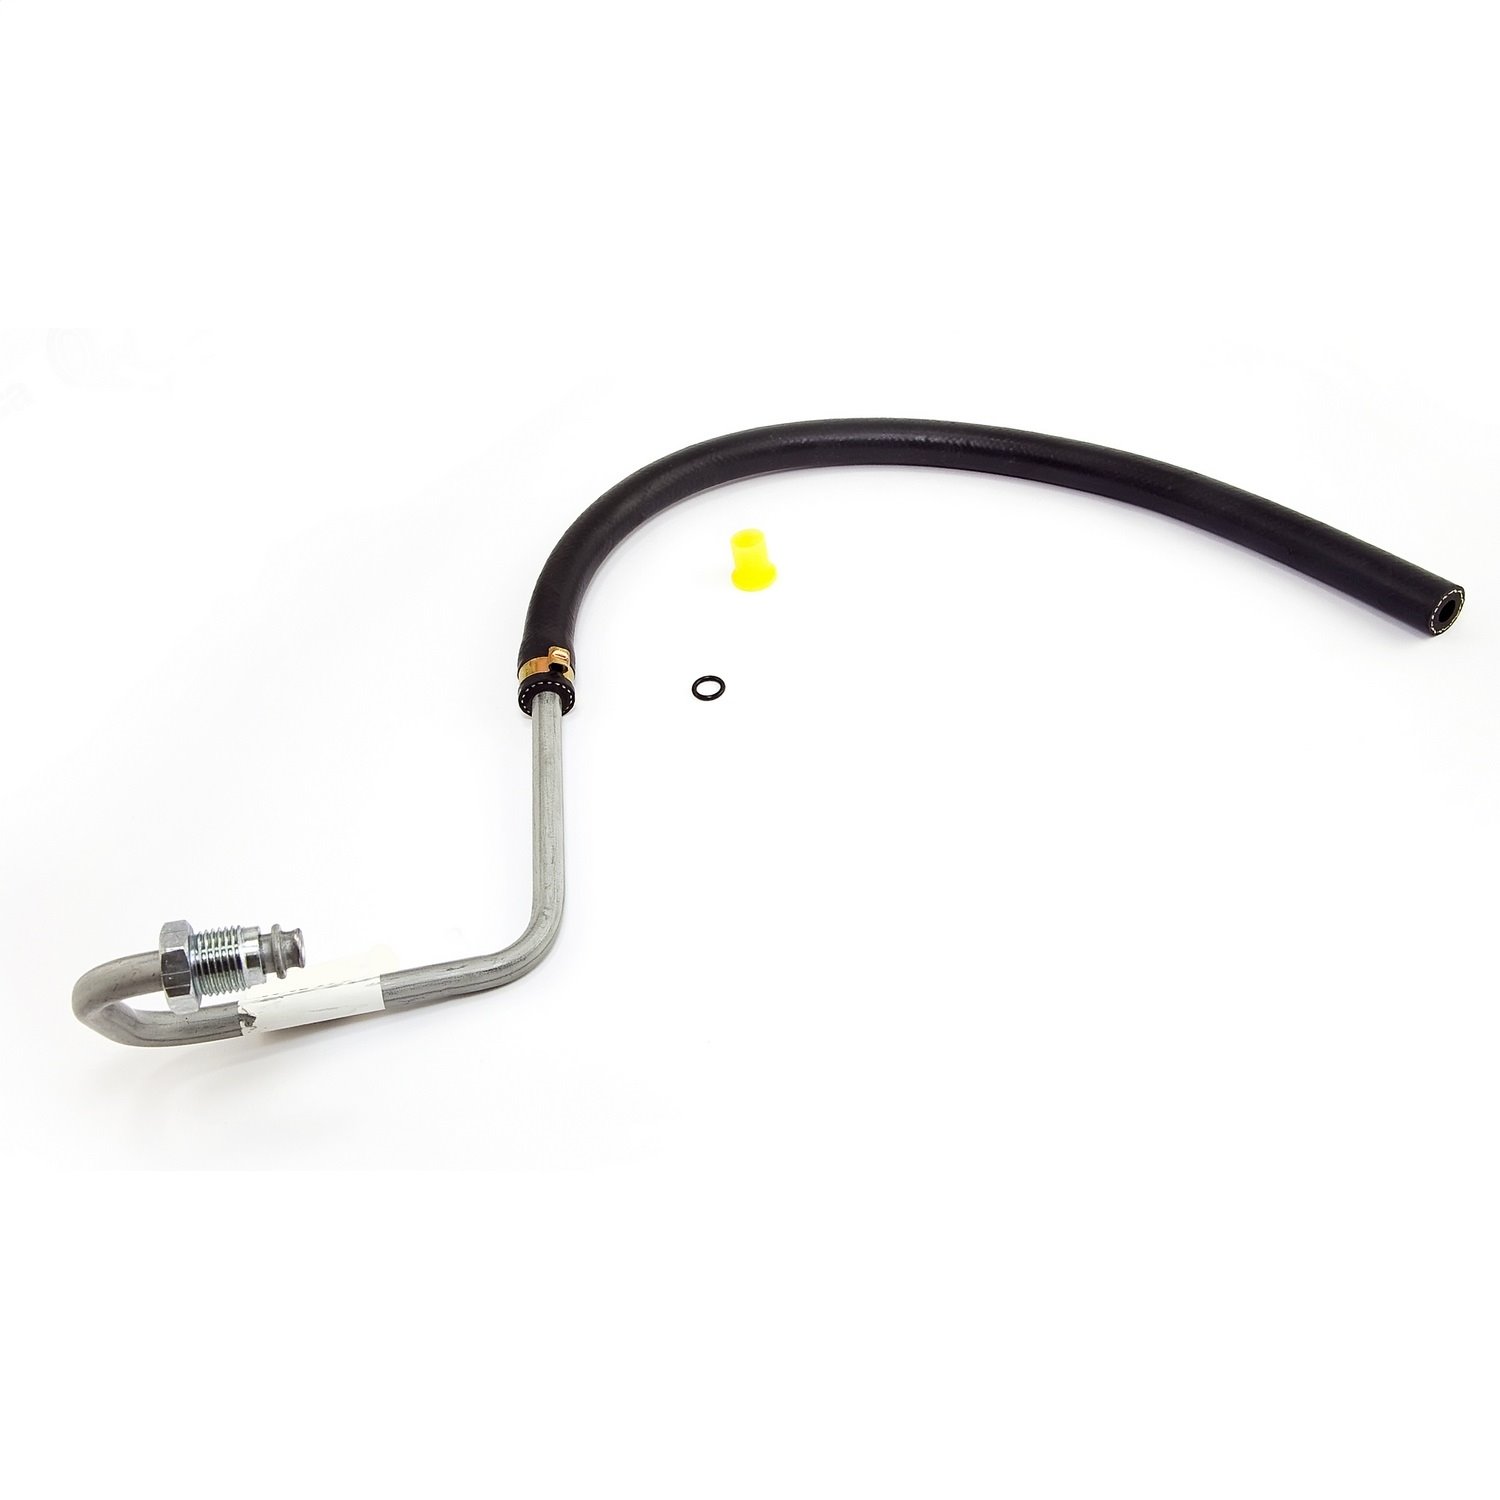 This power steering return hose from Omix-ADA fits 97-02 Jeep Wrangler TJ with a 4.0L engine.